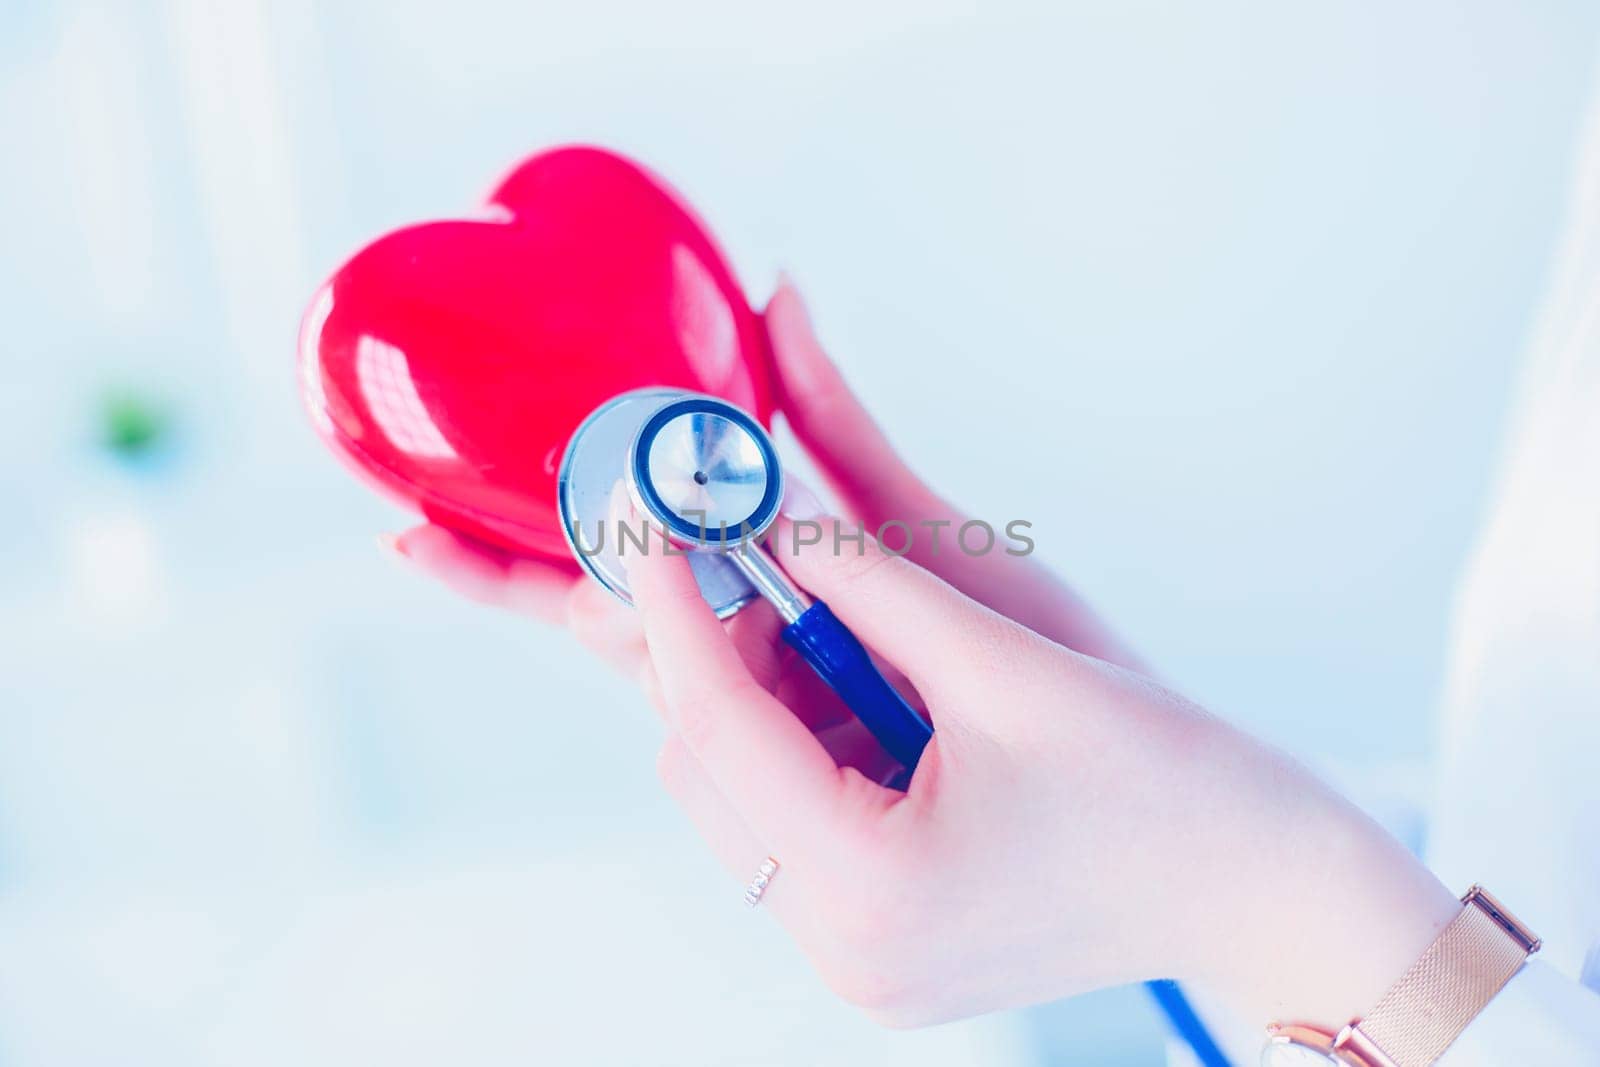 A doctor with stethoscope examining red heart, isolated on white background.